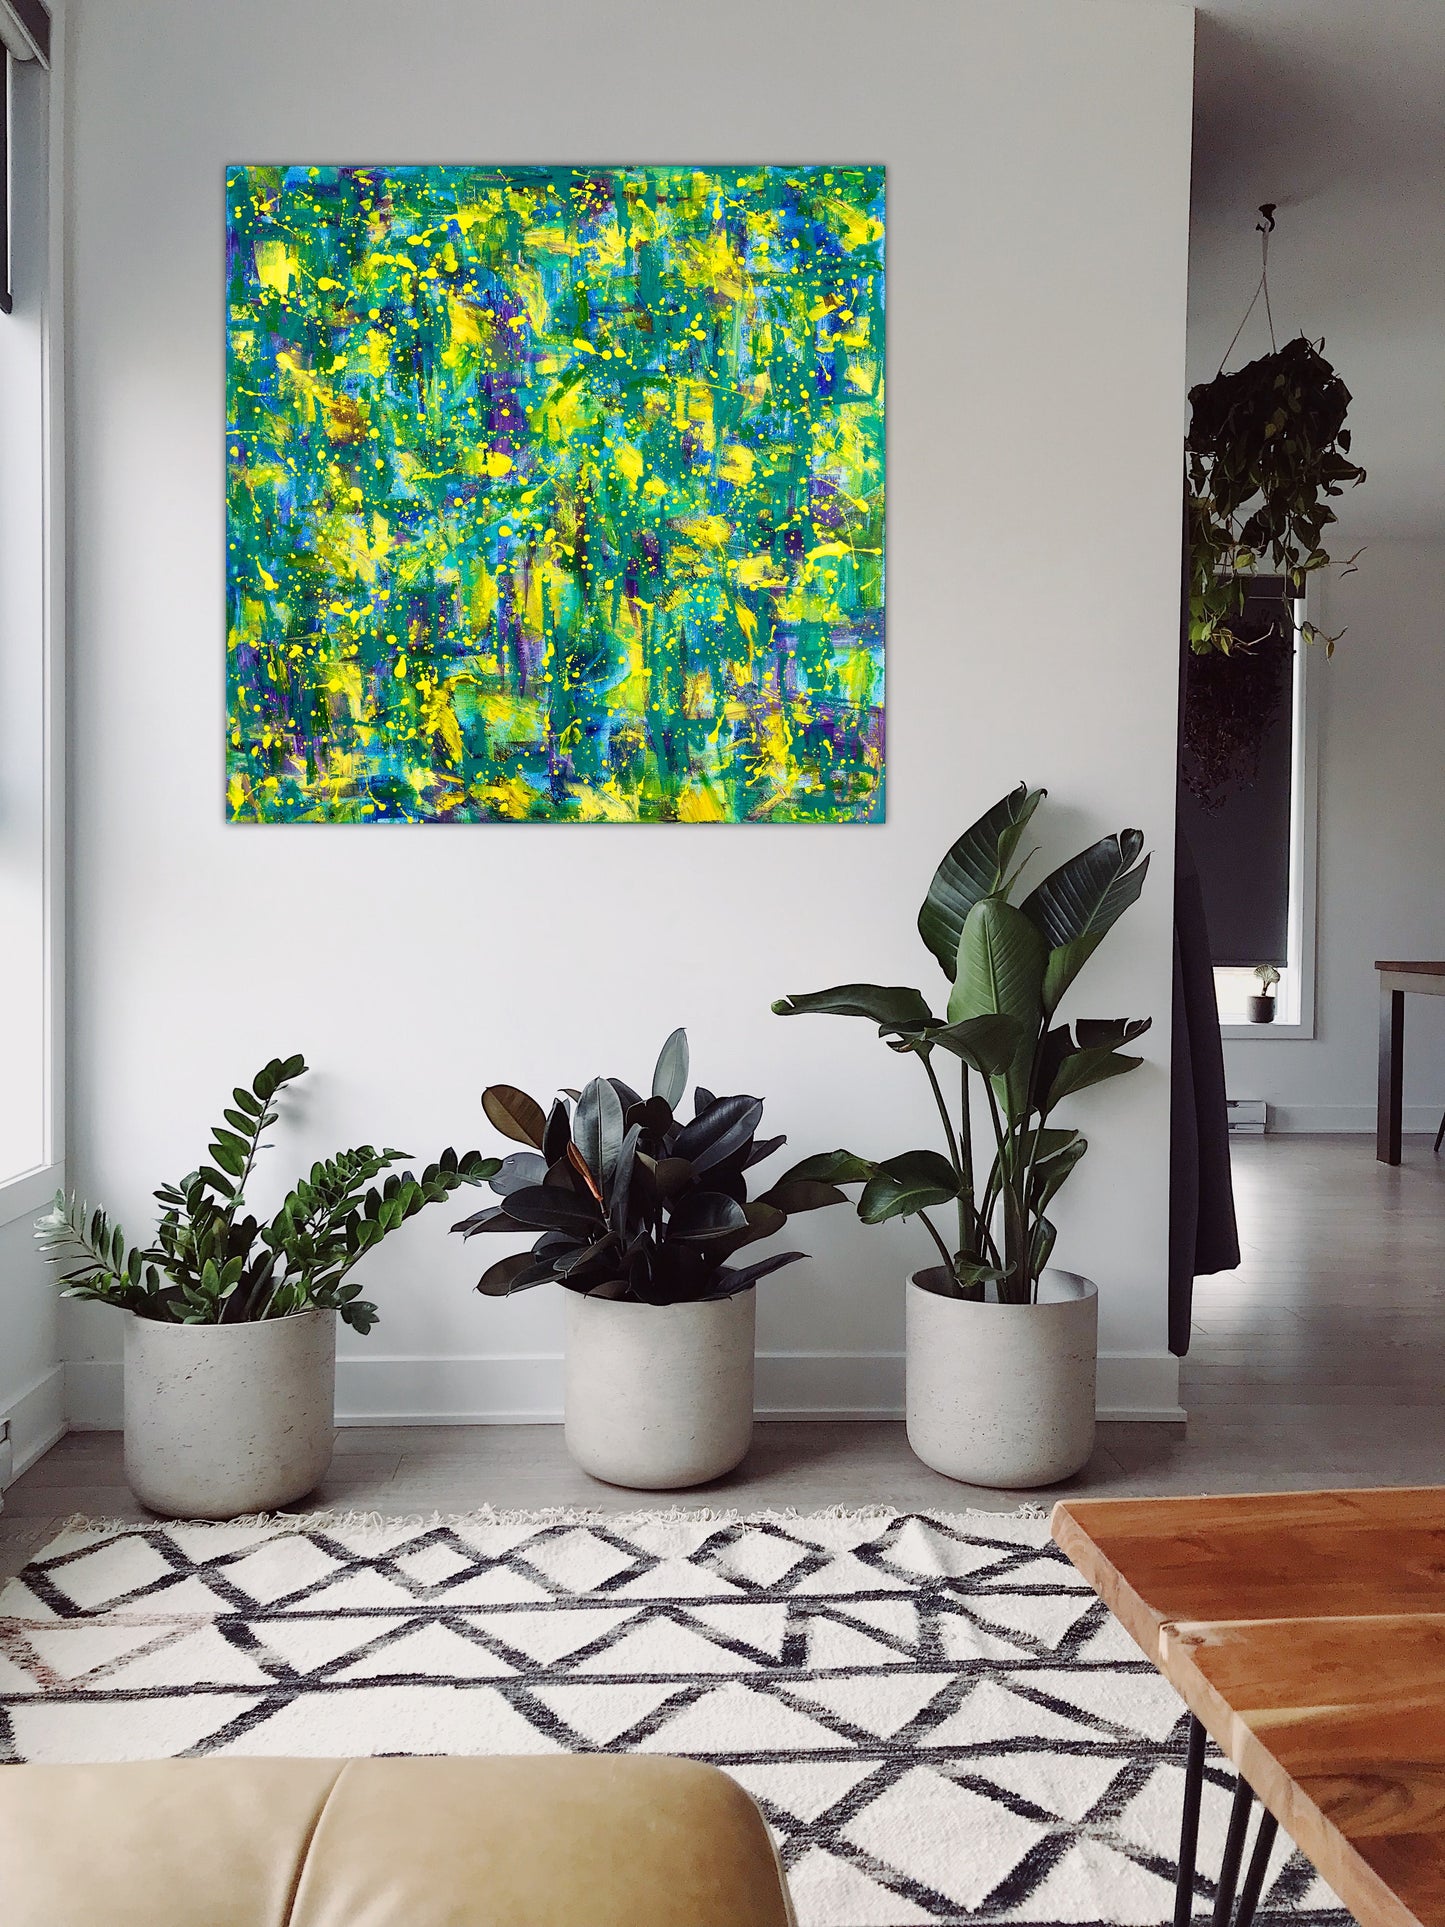 Welcome to the Jungle : 35" x 35" - 90 x 90 cm